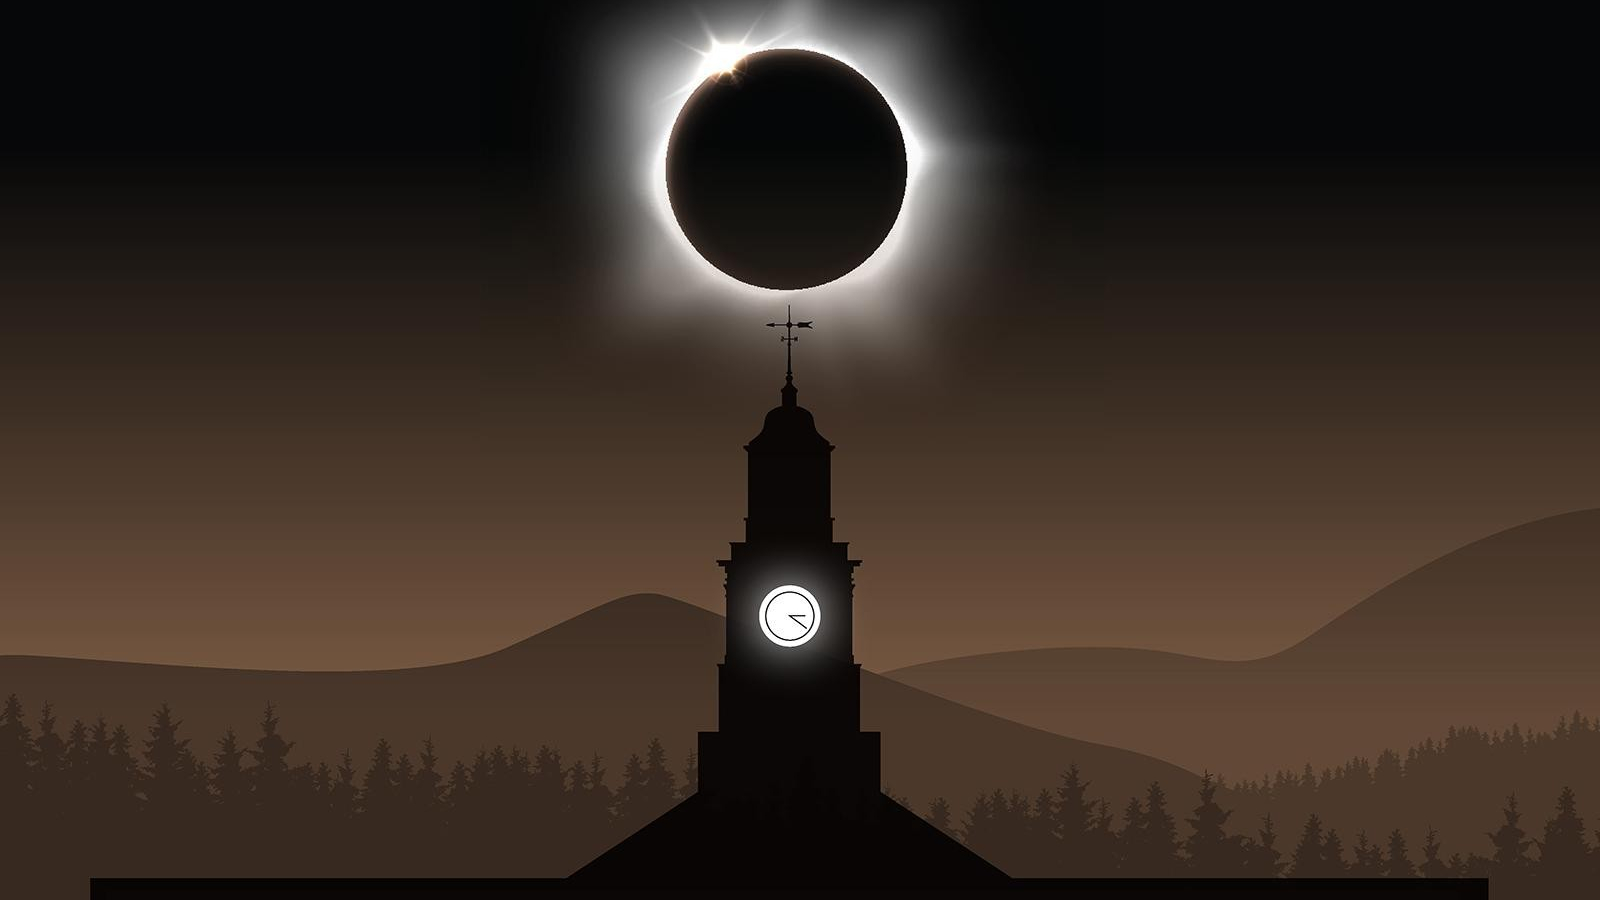 An illustration of a total solar eclipse over a clock tower